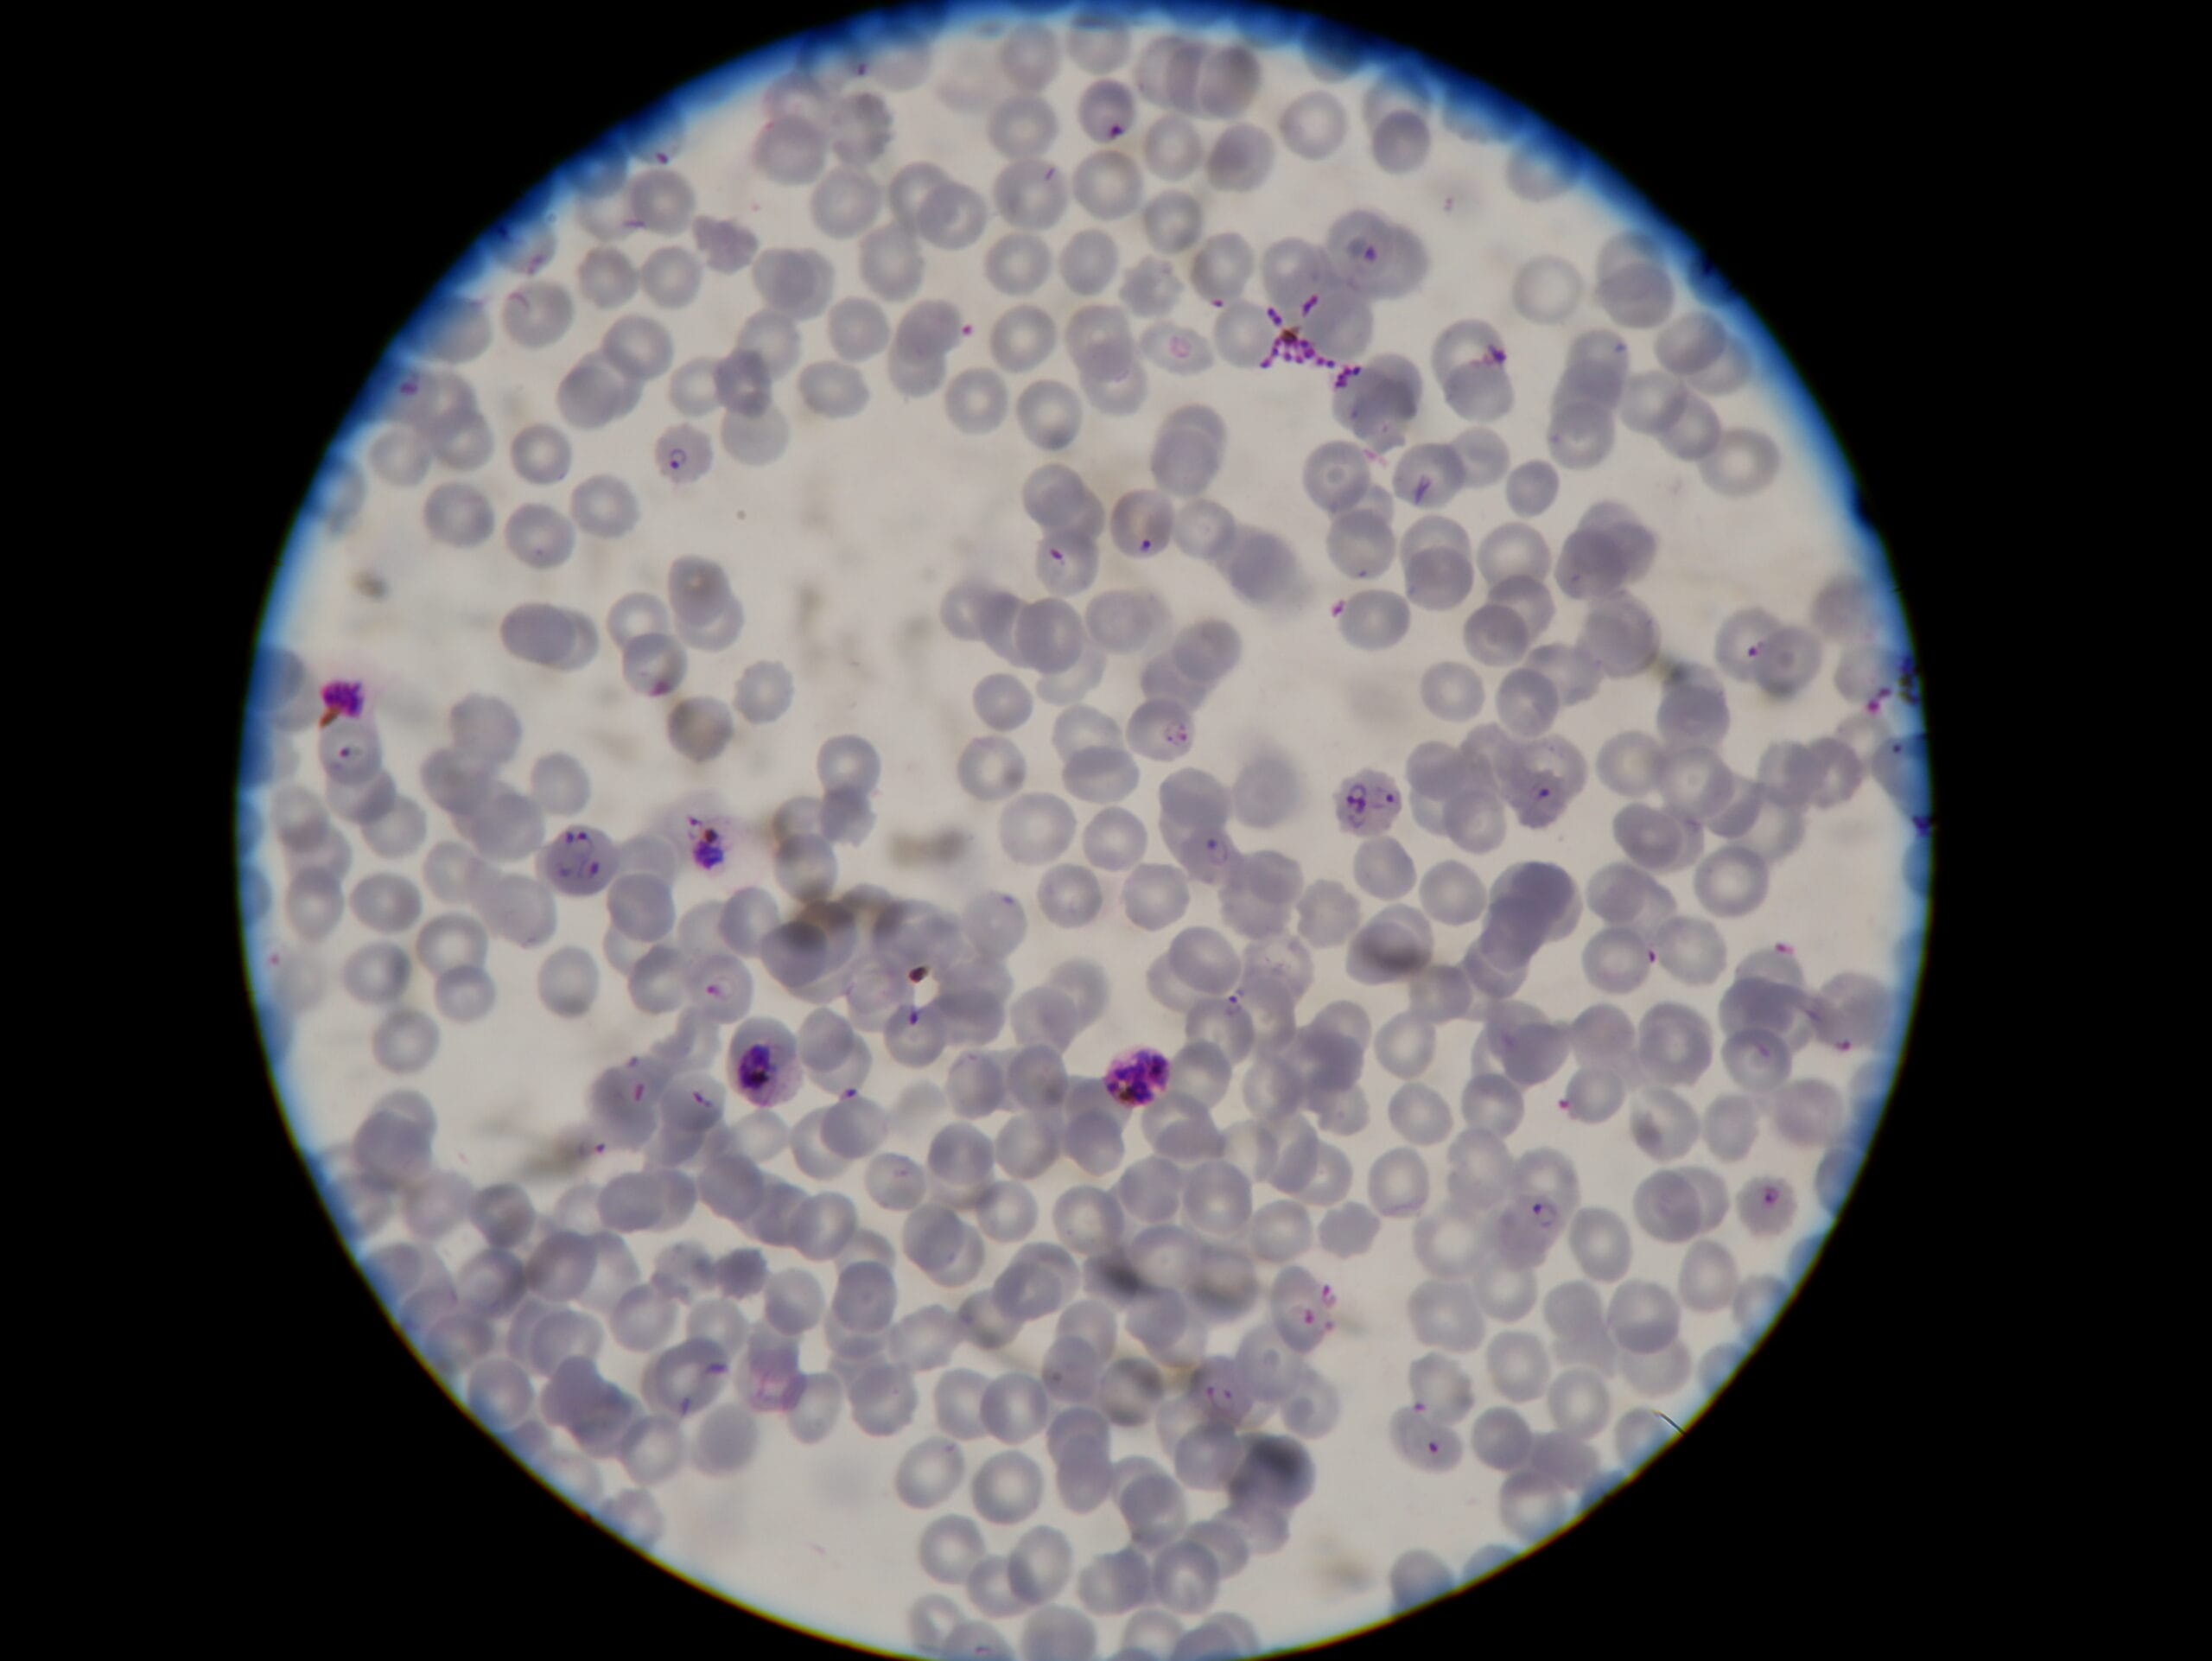 Malaria parasites in blood sample under the microscope